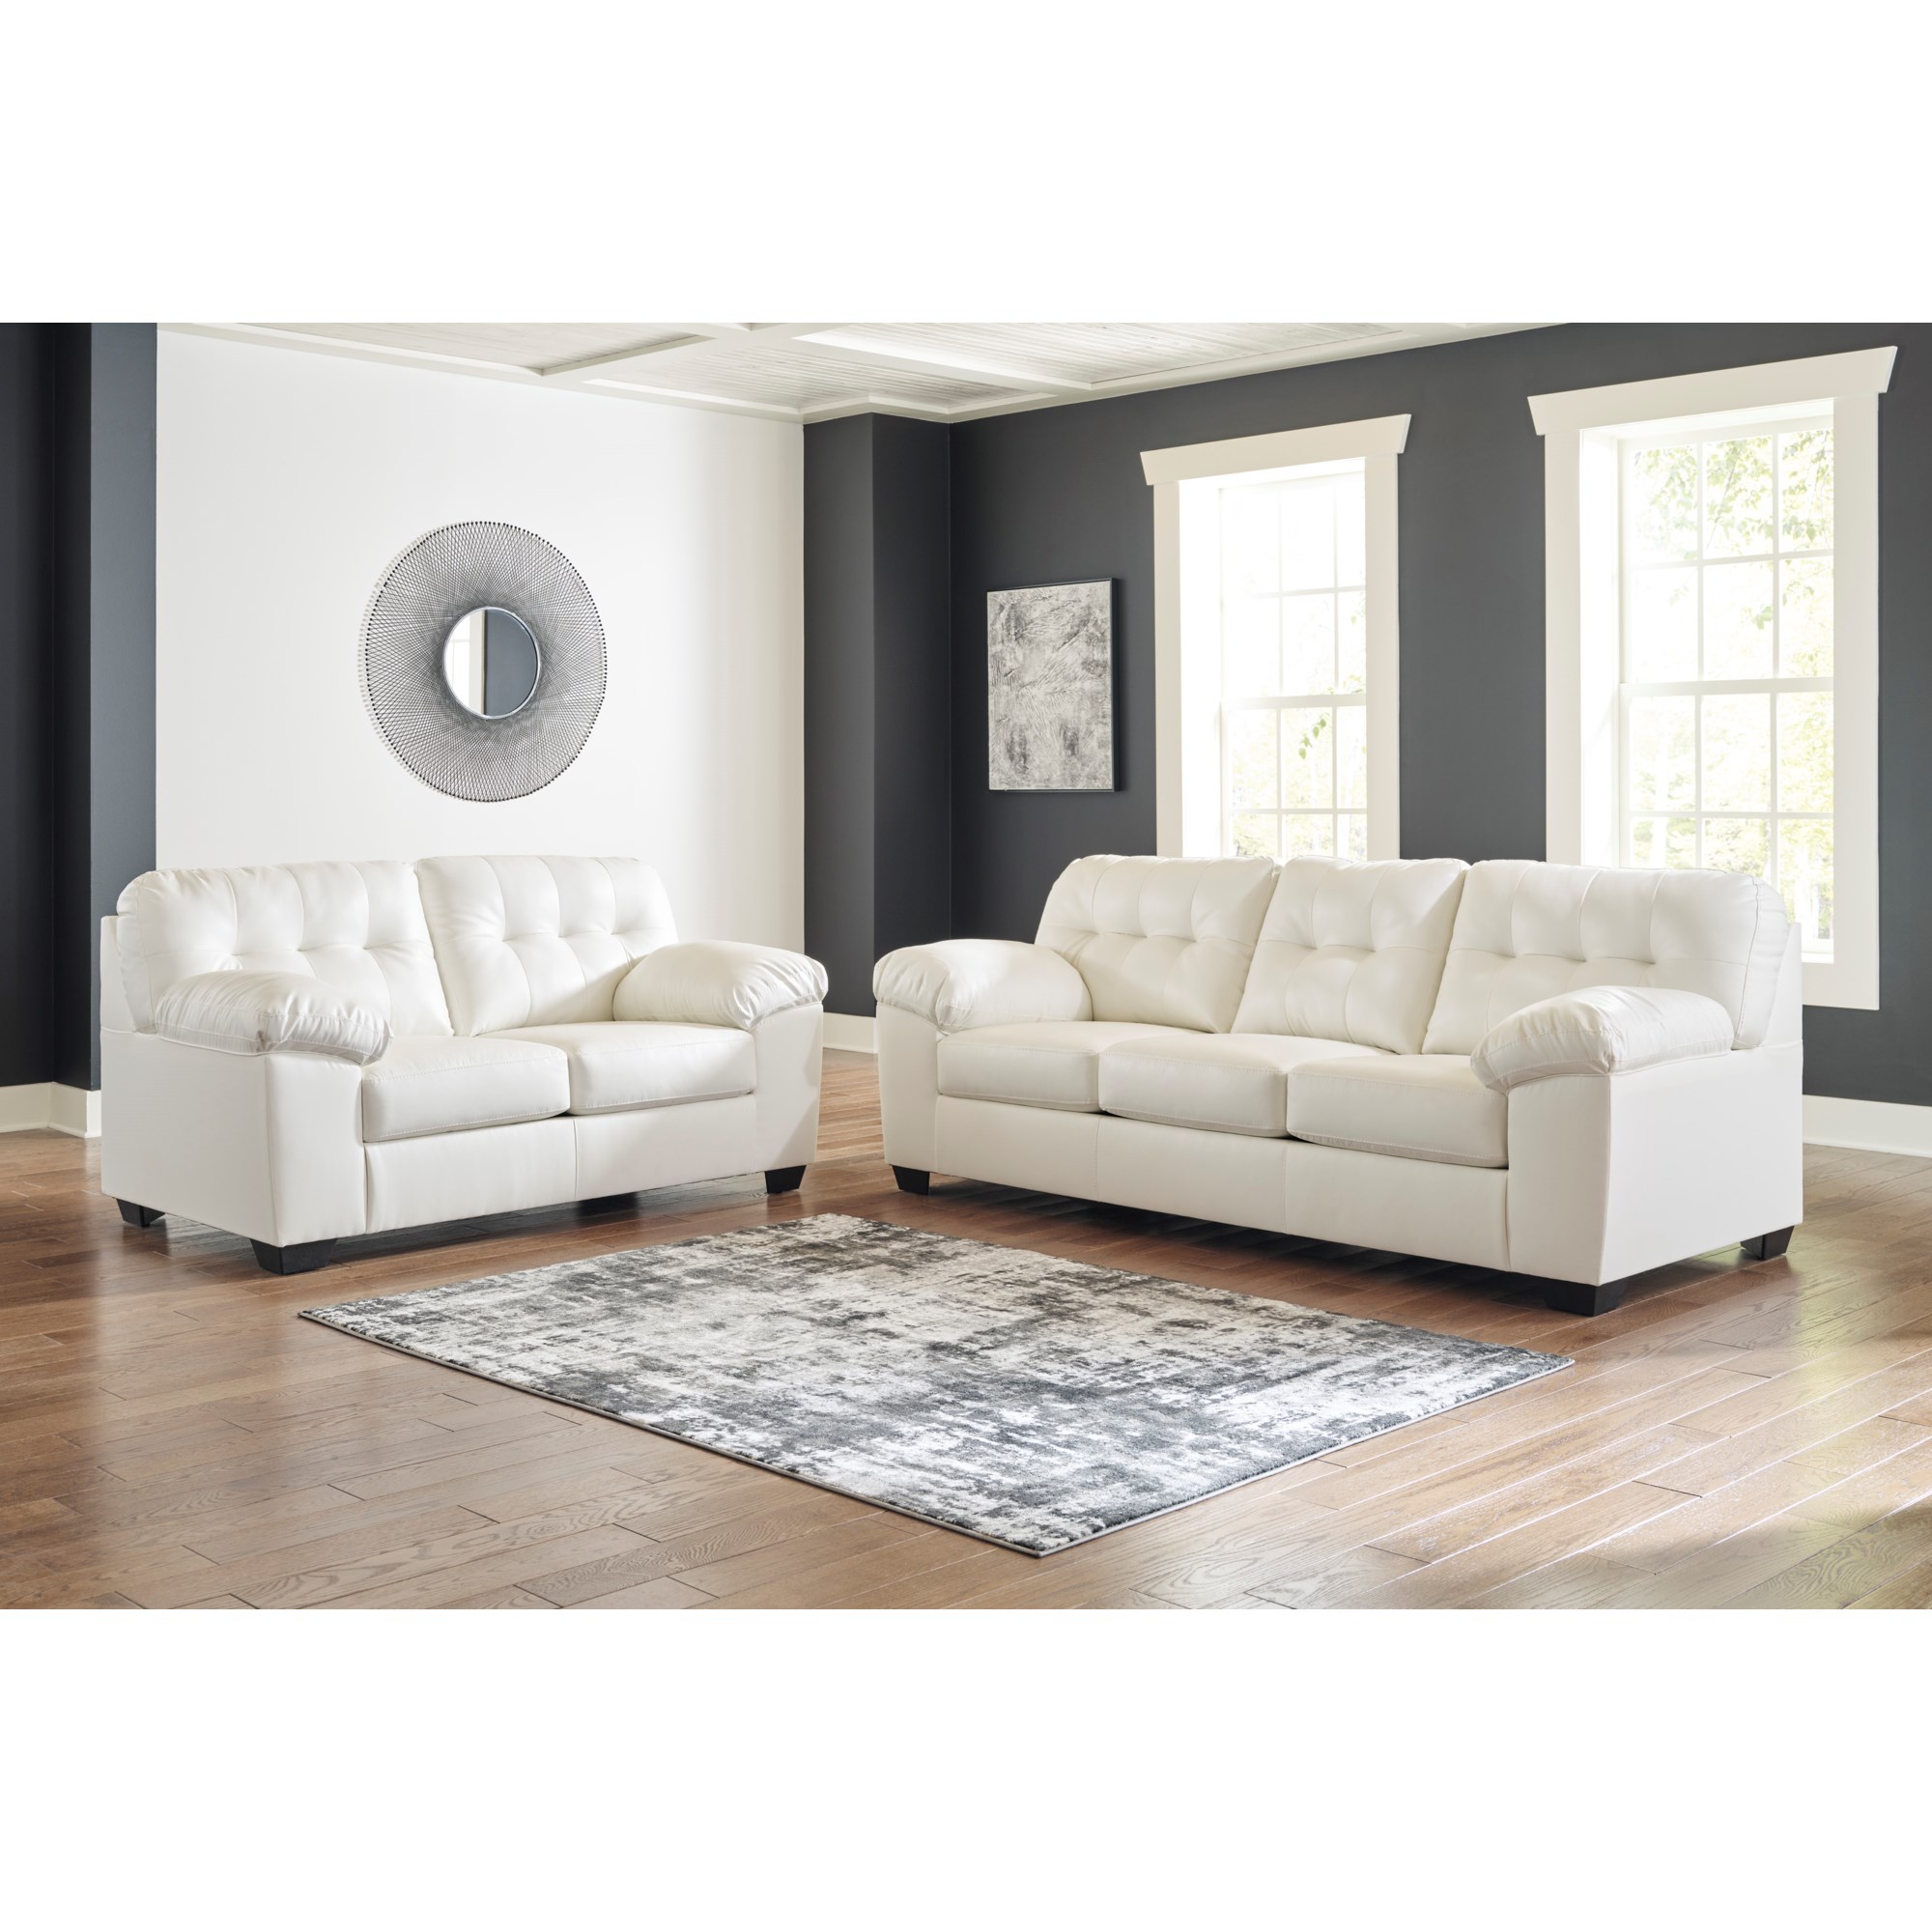 Living Room Furniture - Furniture Superstore - Rochester, MN - Rochester,  Southern Minnesota Living Room Furniture Store